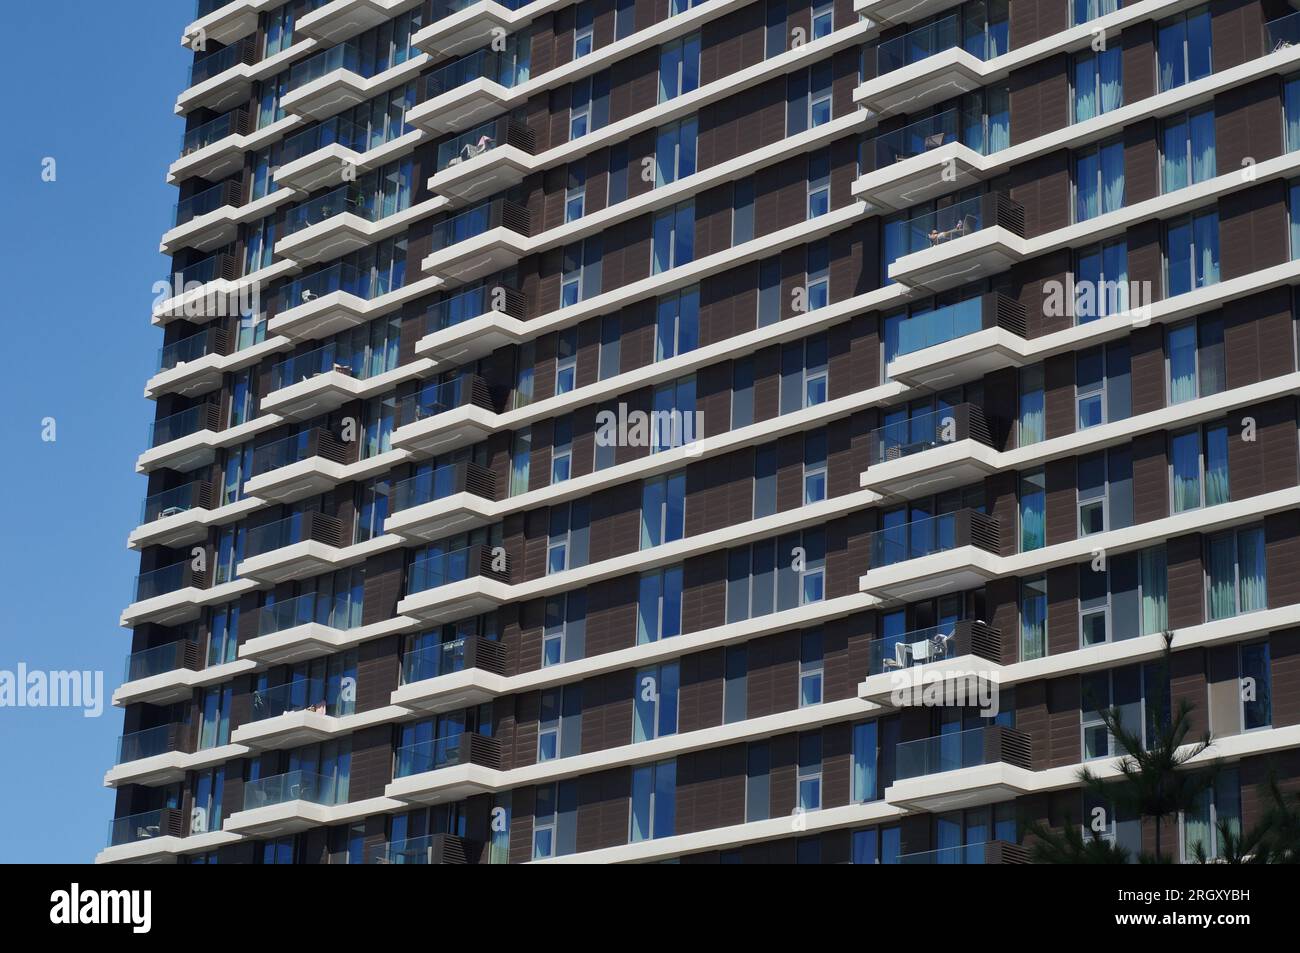 Tall Building with lots of balconies Stock Photo